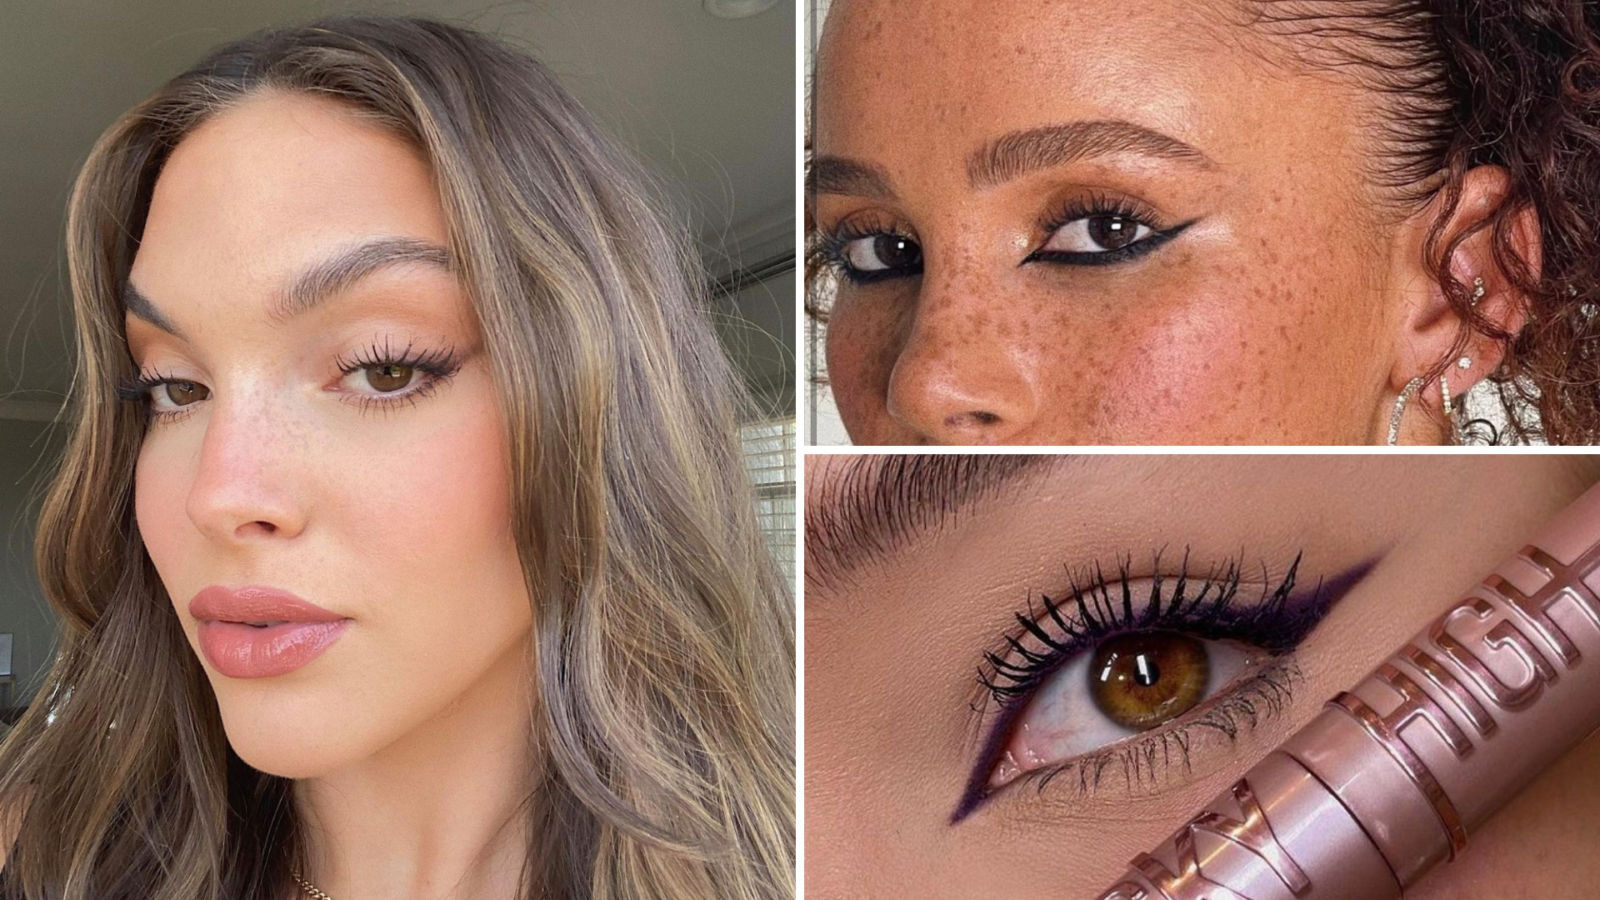 Make-up trends 2021: Beauty experts share their predictions